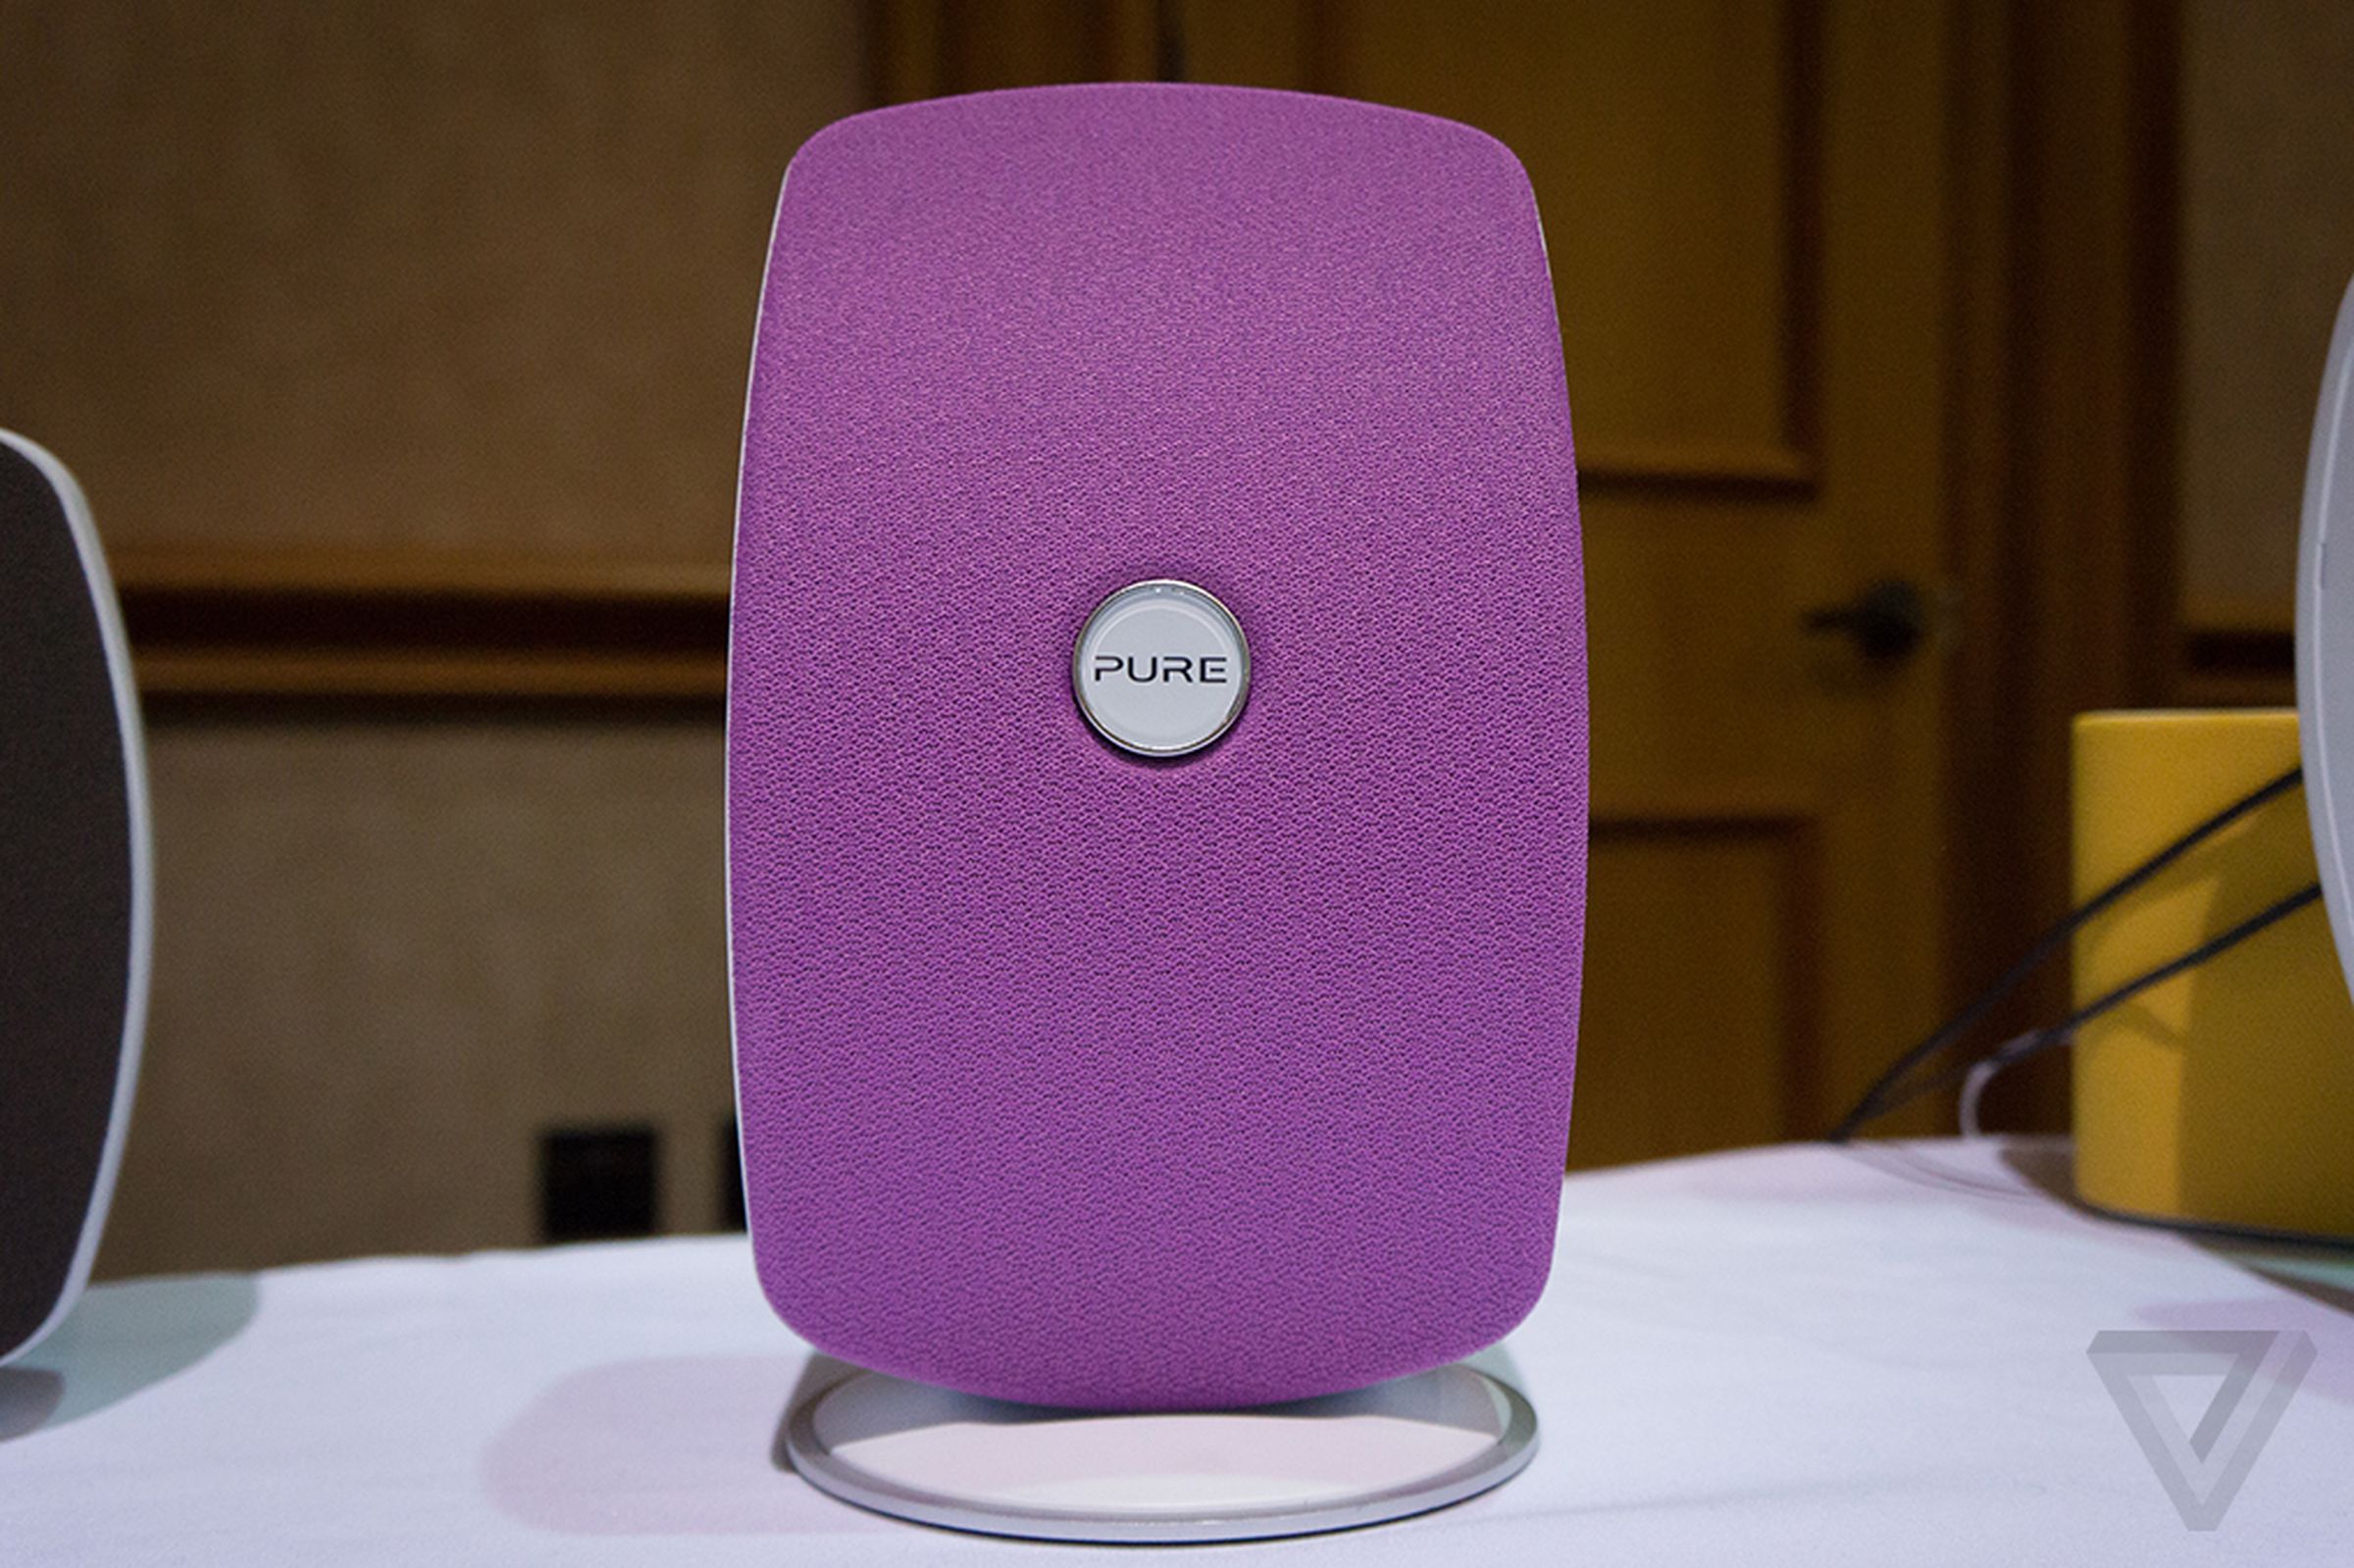 Pure's colorful speaker family